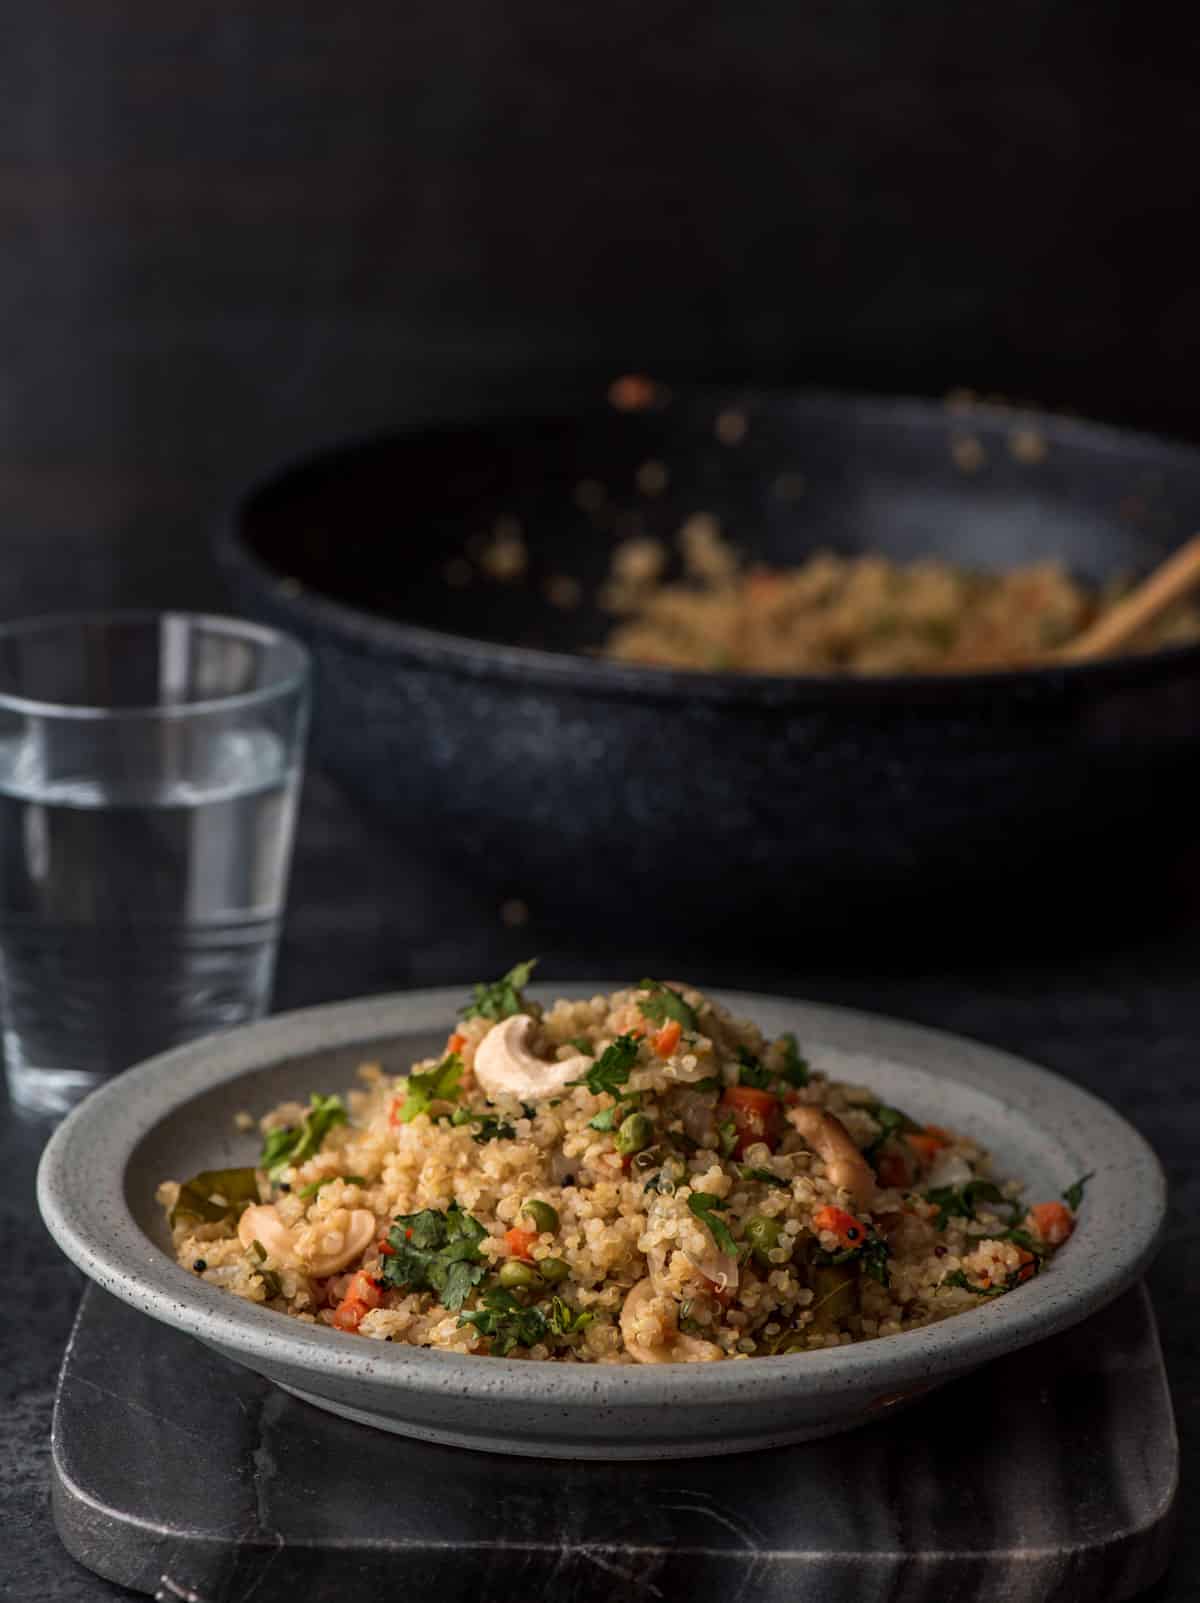 You'll love this delicious vegetable quinoa pulao - it is a great way to work more veggies in your meal and also you can put them together in less than 30 minutes.